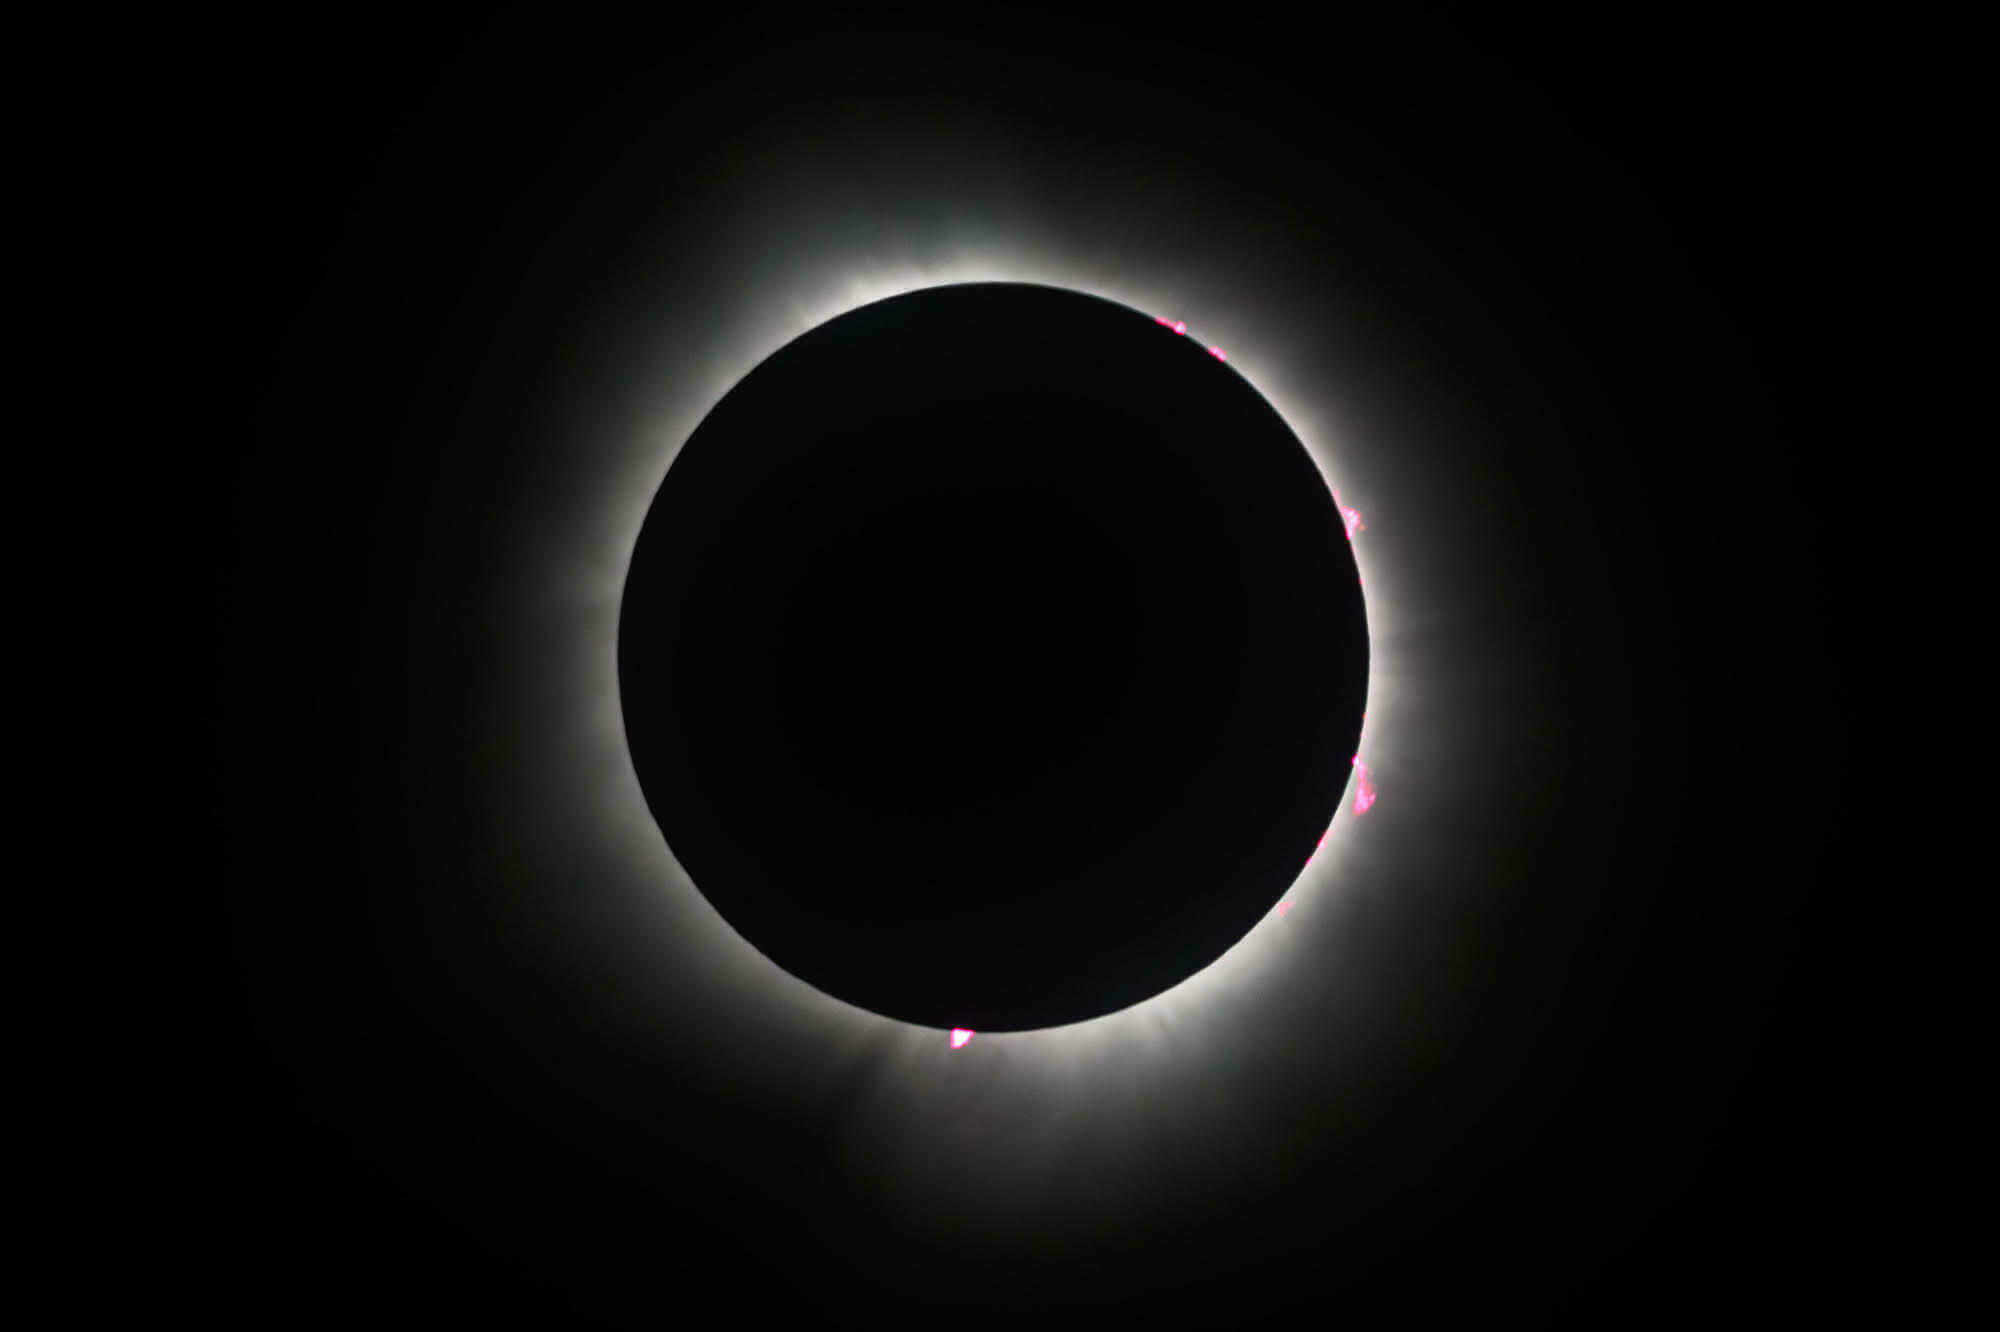 A photo of a full solar eclipse on April 8 with only the sun's corona visible behind the dark outline of the moon.